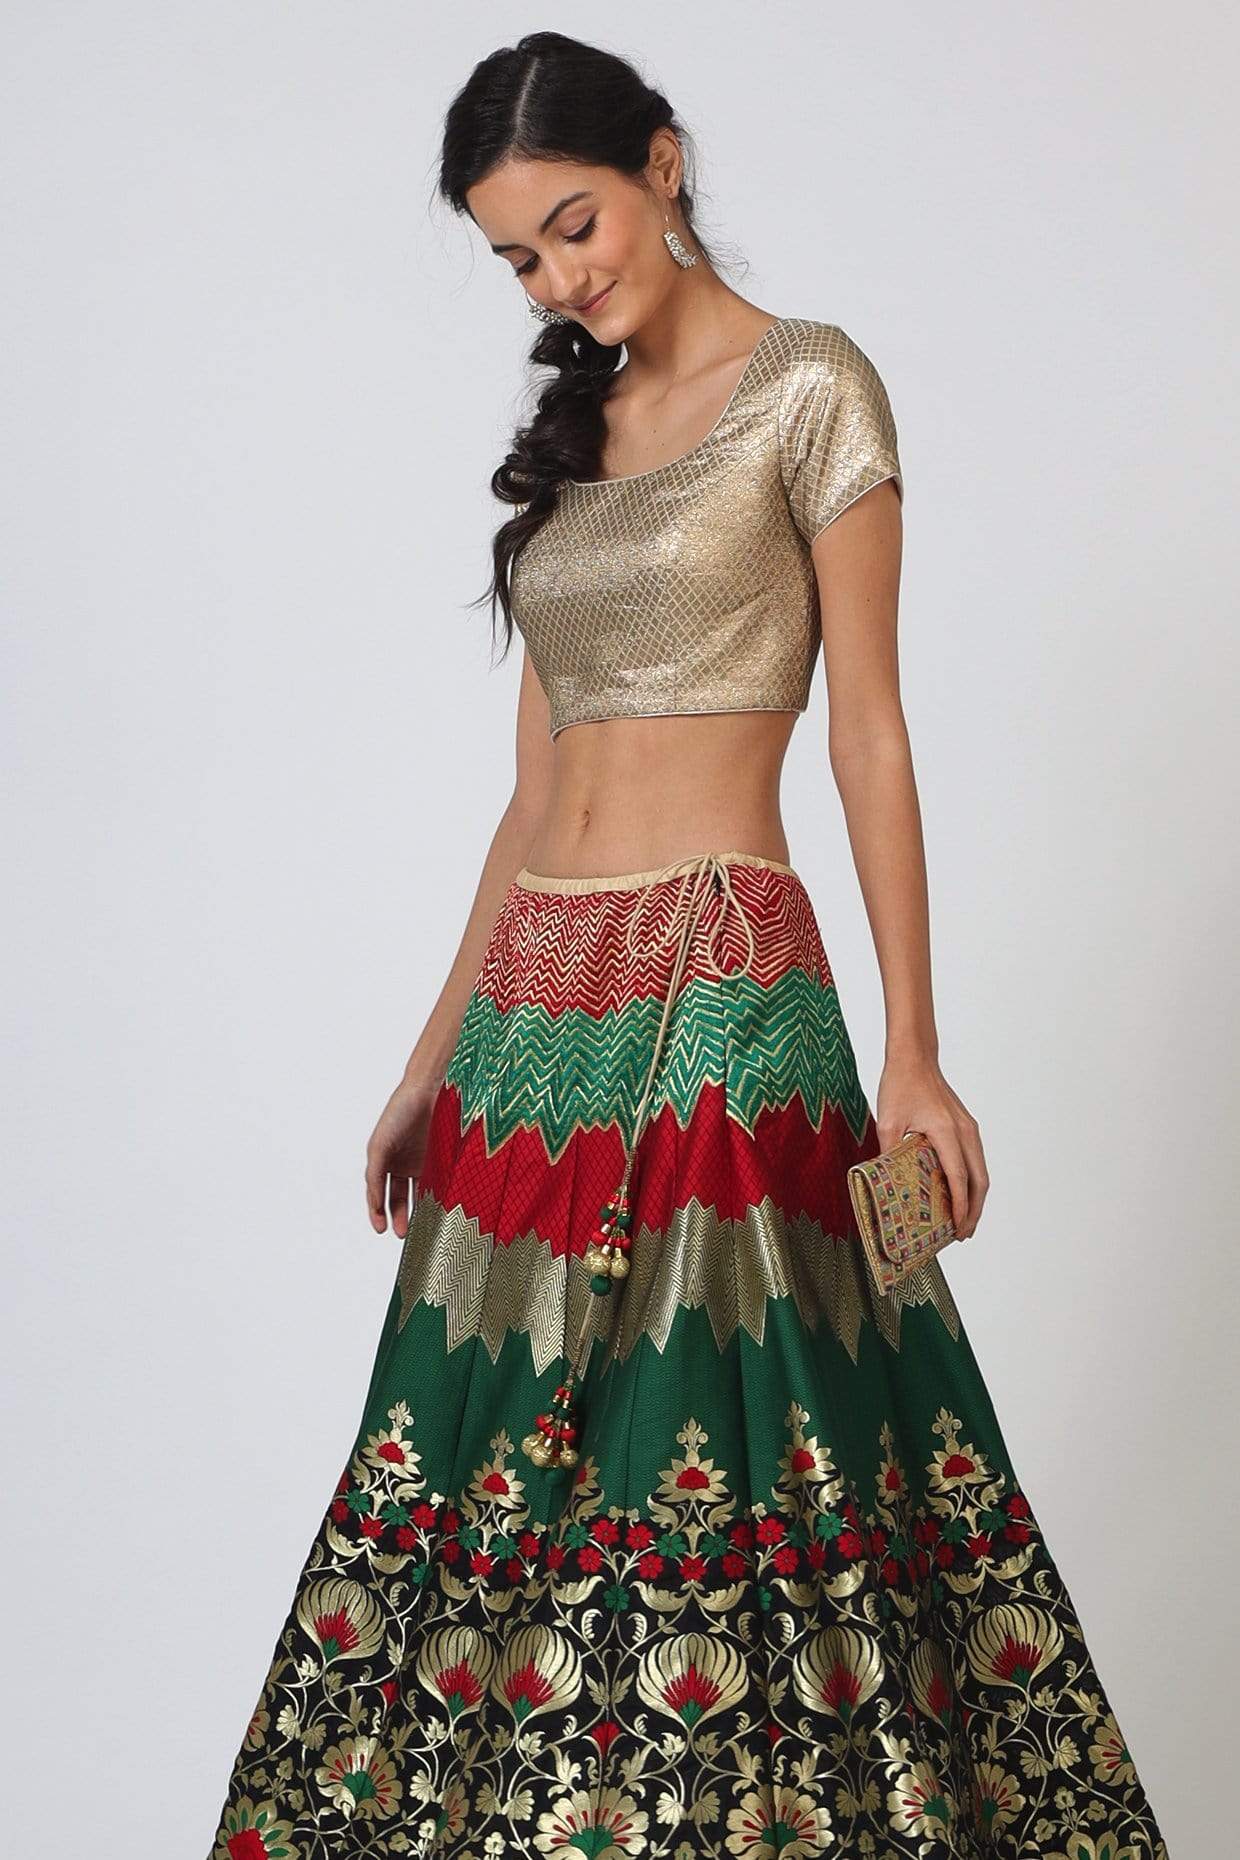 Black Base Brocade Lehenga Indian Clothing in Denver, CO, Aurora, CO, Boulder, CO, Fort Collins, CO, Colorado Springs, CO, Parker, CO, Highlands Ranch, CO, Cherry Creek, CO, Centennial, CO, and Longmont, CO. NATIONWIDE SHIPPING USA- India Fashion X